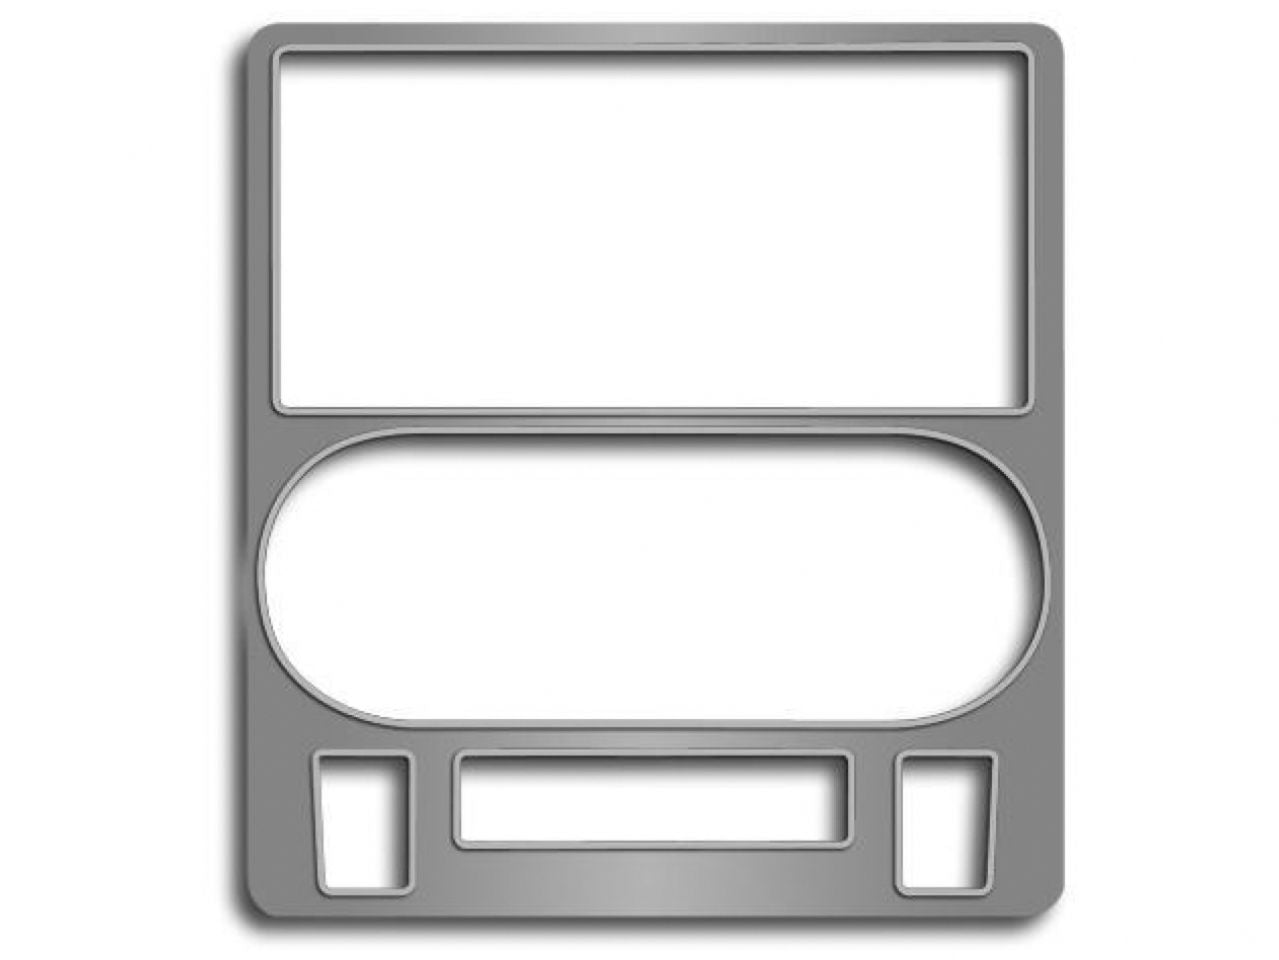 American Car Craft (ACC) 2008-2014 Challenger 5.7 and SRT 8 Brushed Dash Trim Plate